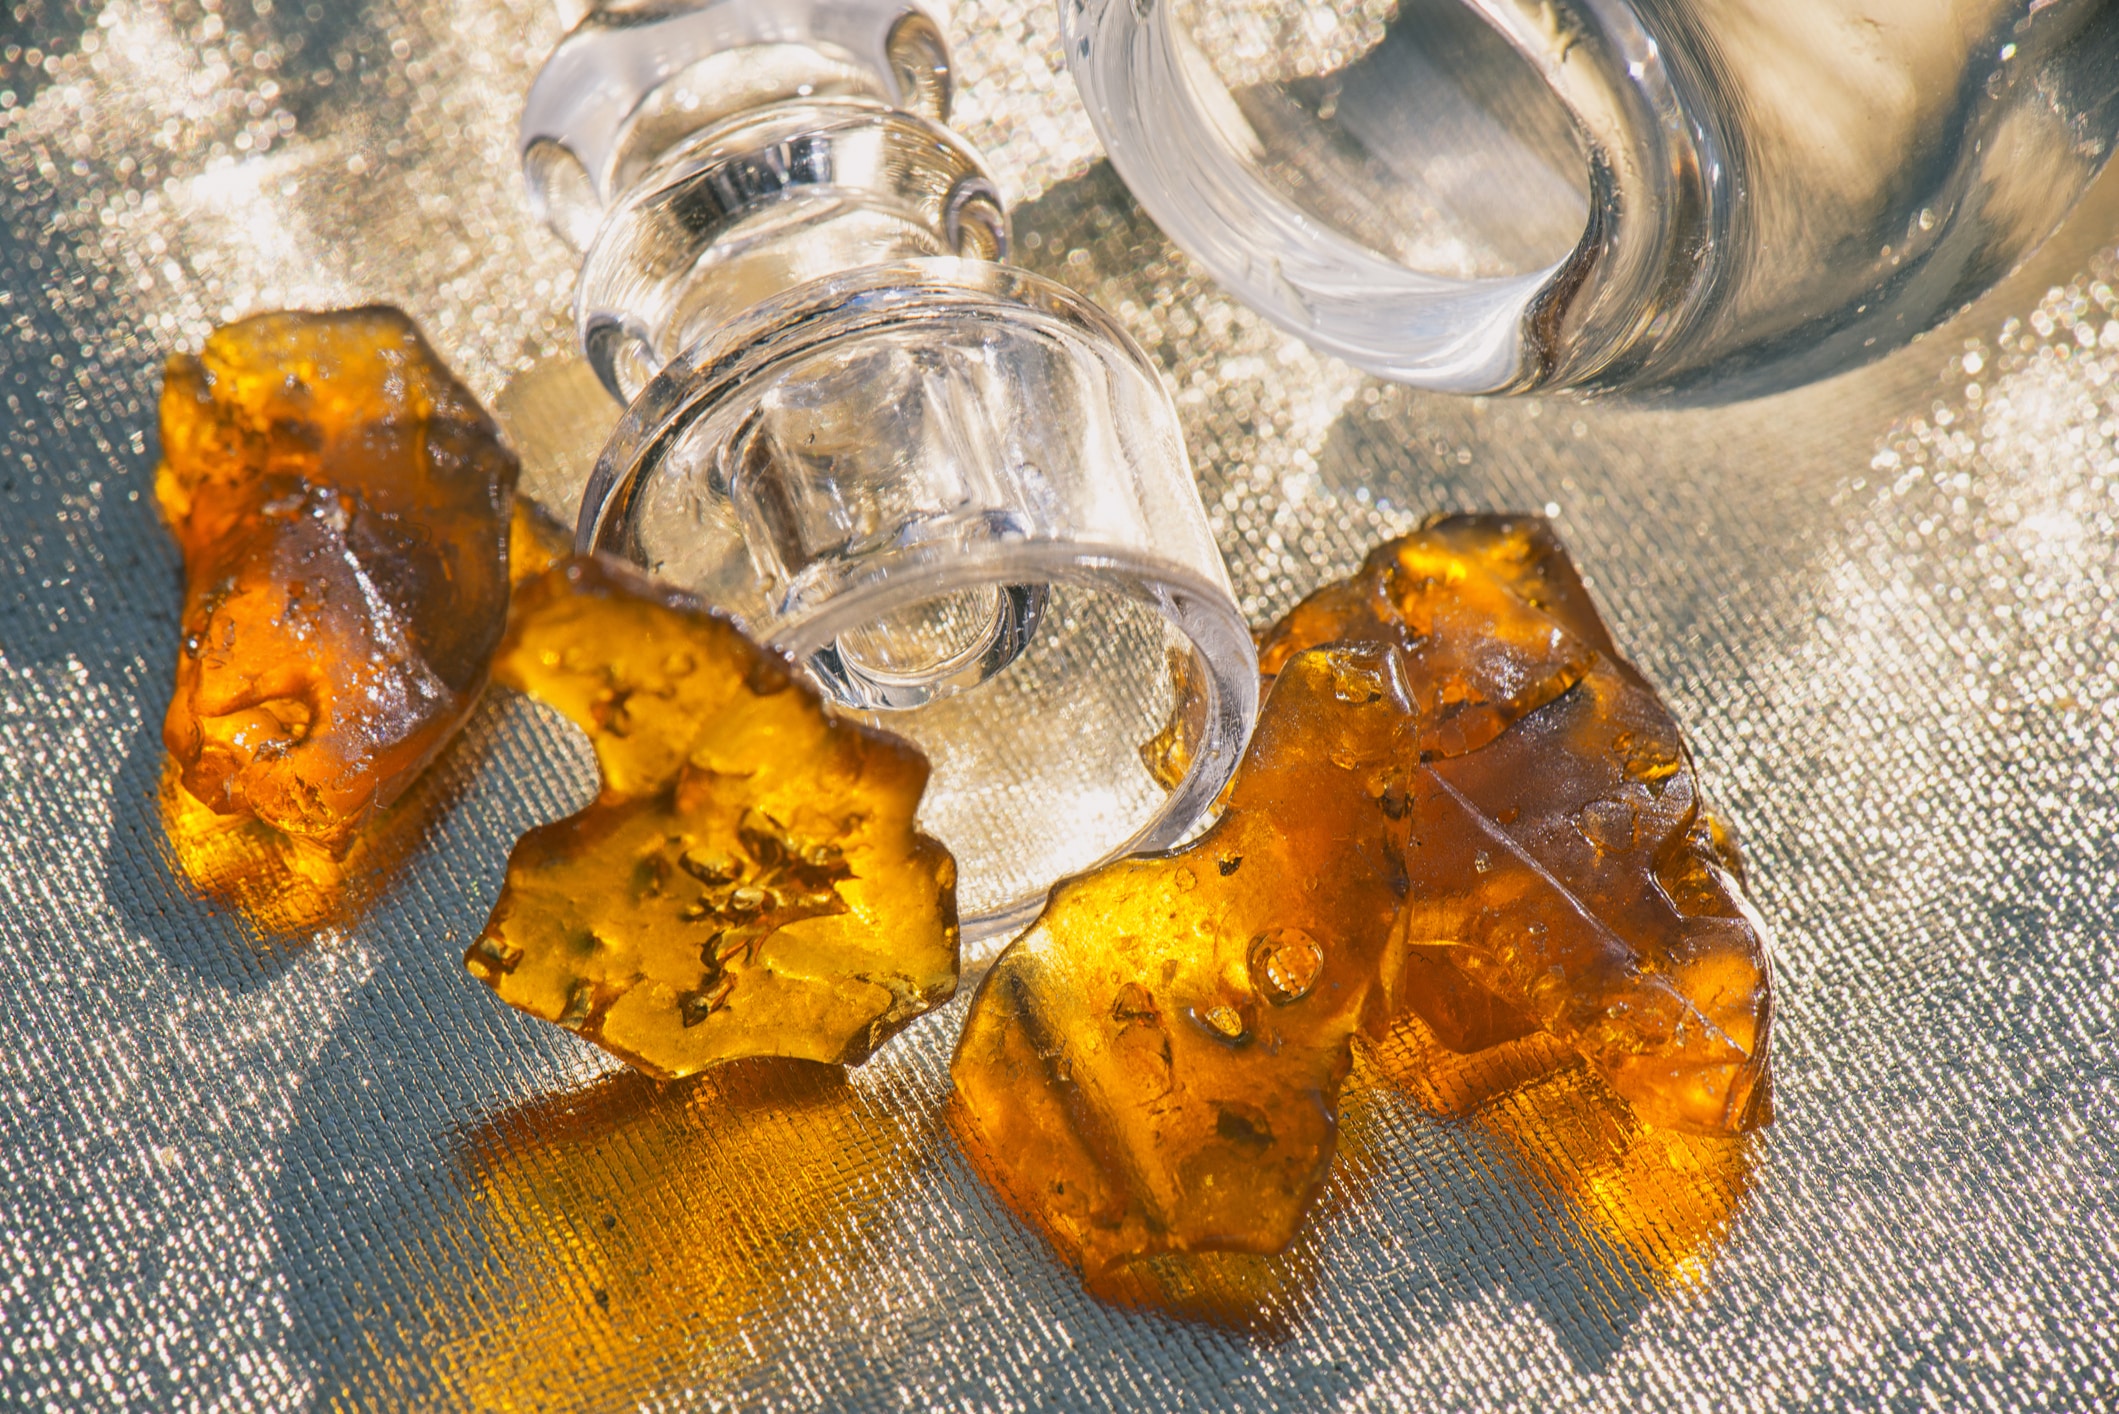 Pieces of cannabis oil concentrate aka shatter with glass rig